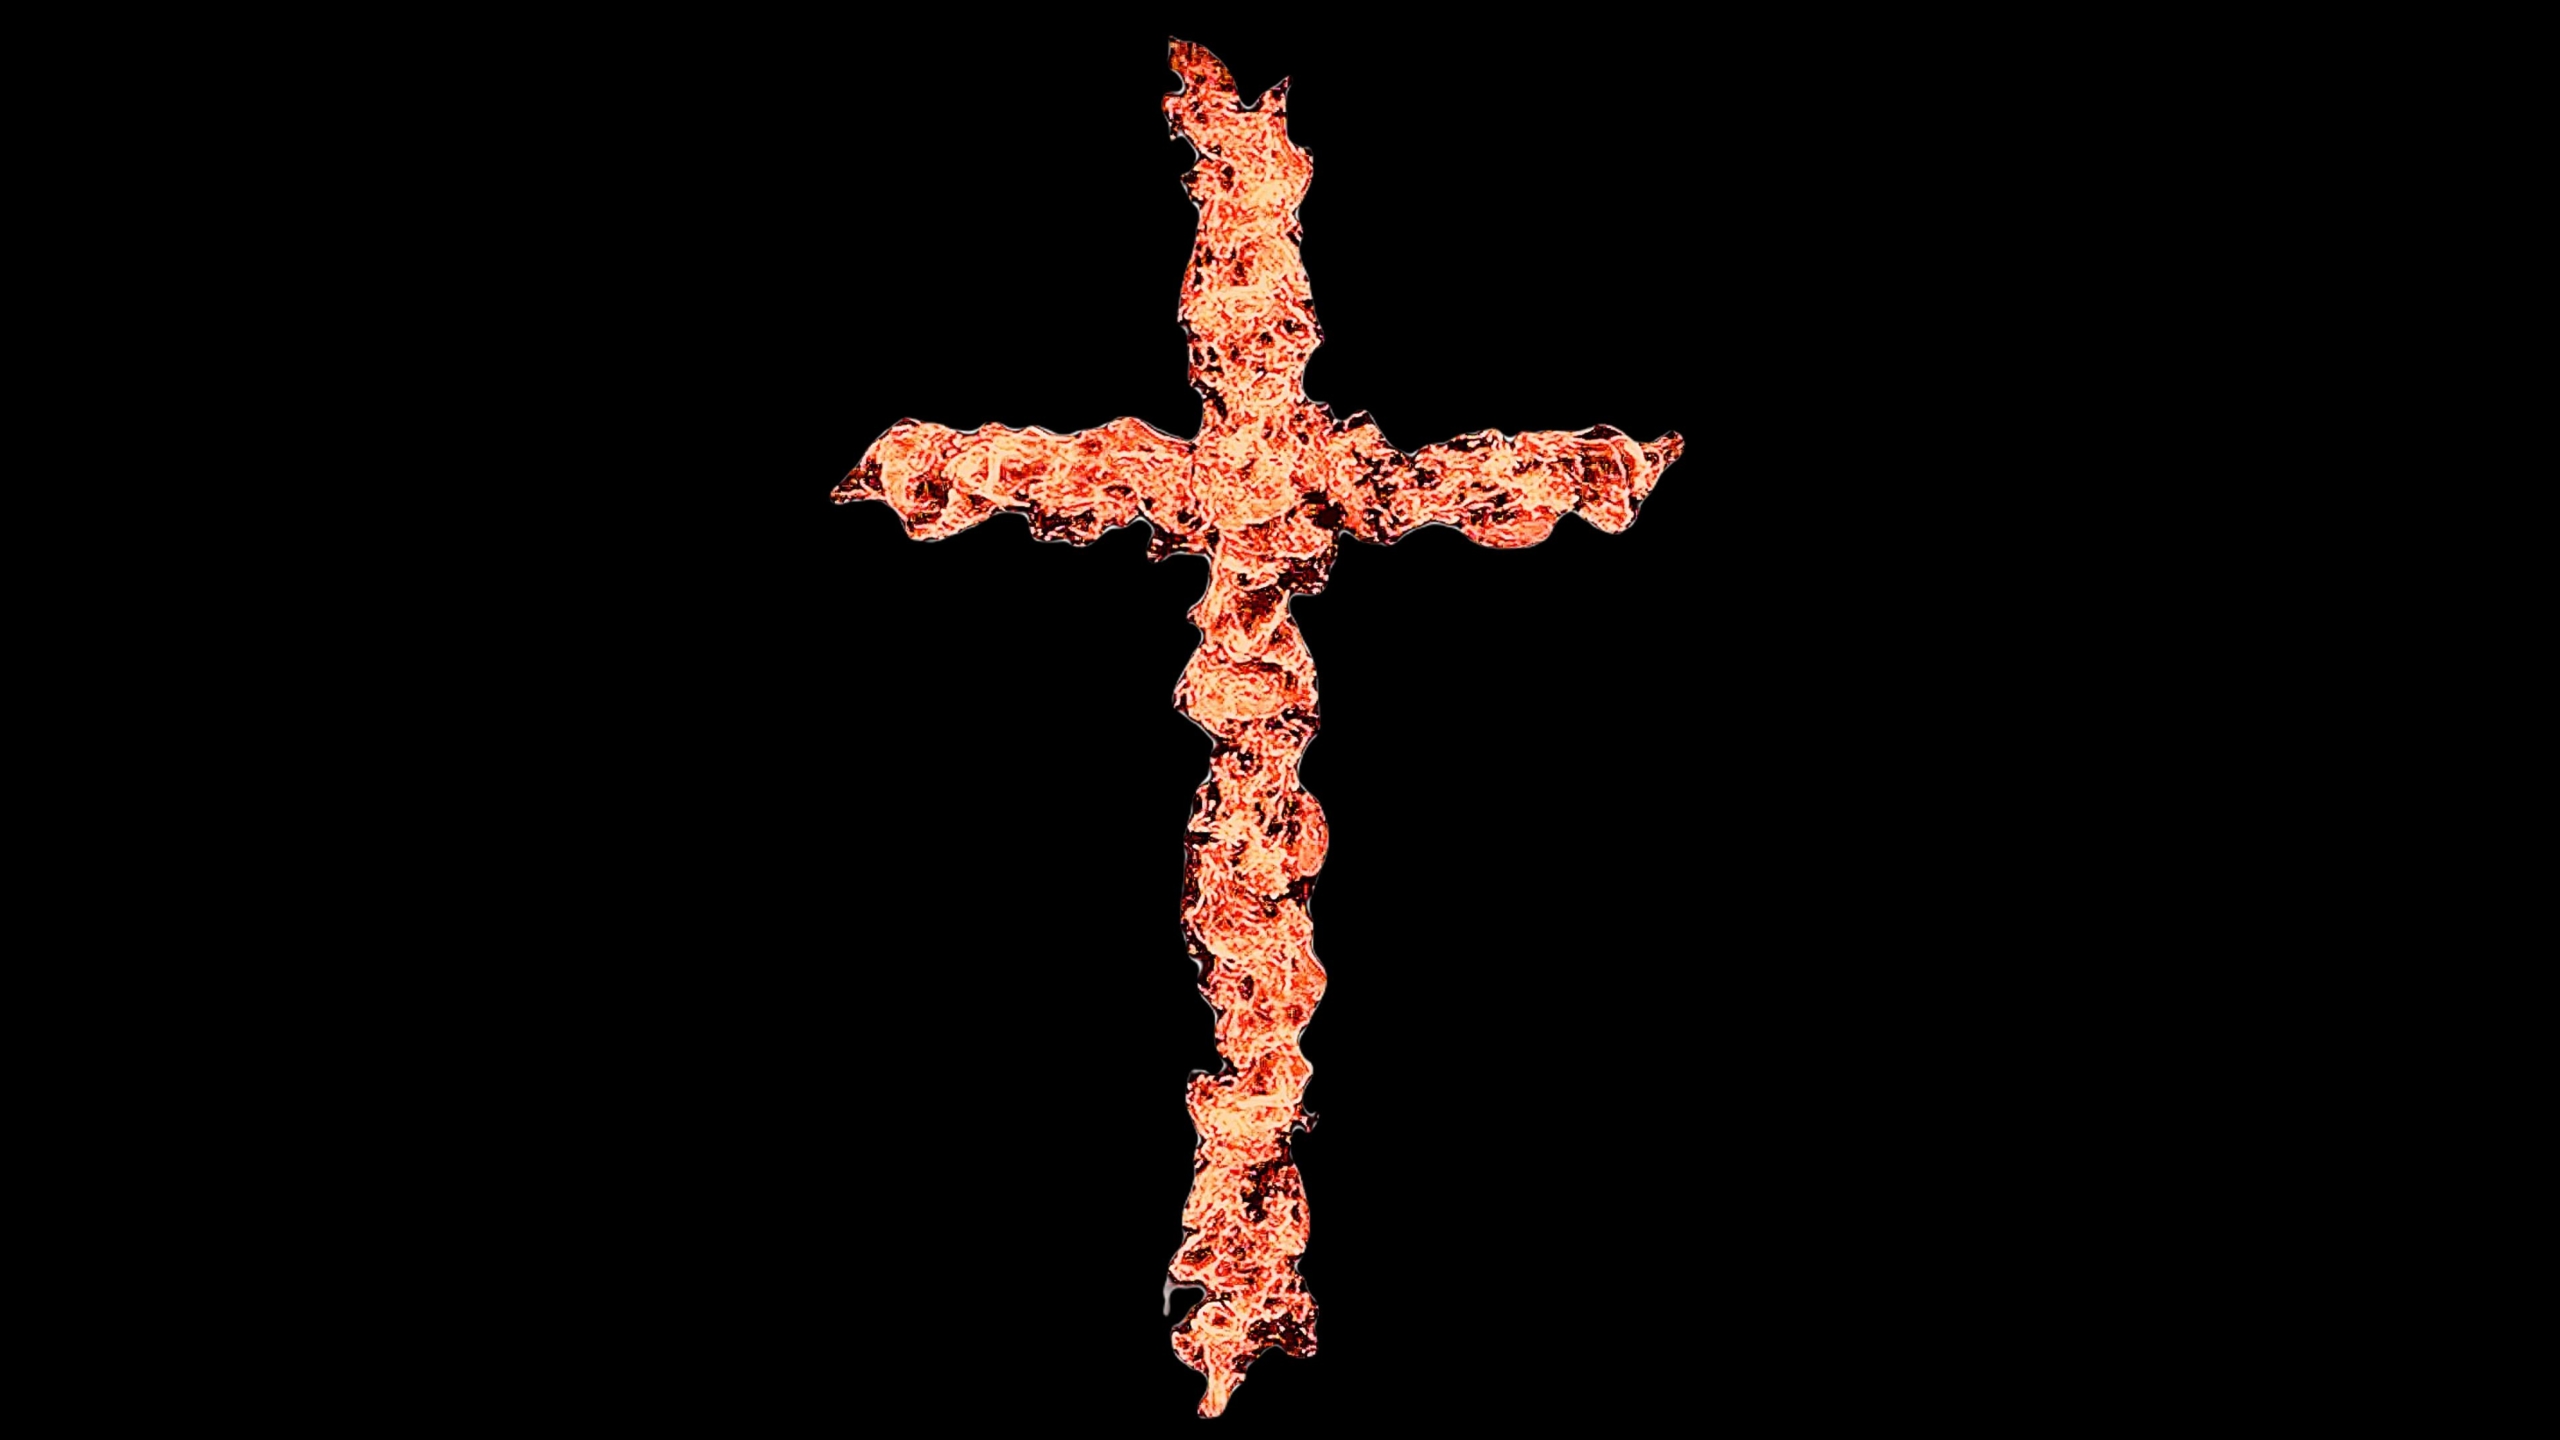 cross that looks like it's made of fire with black background